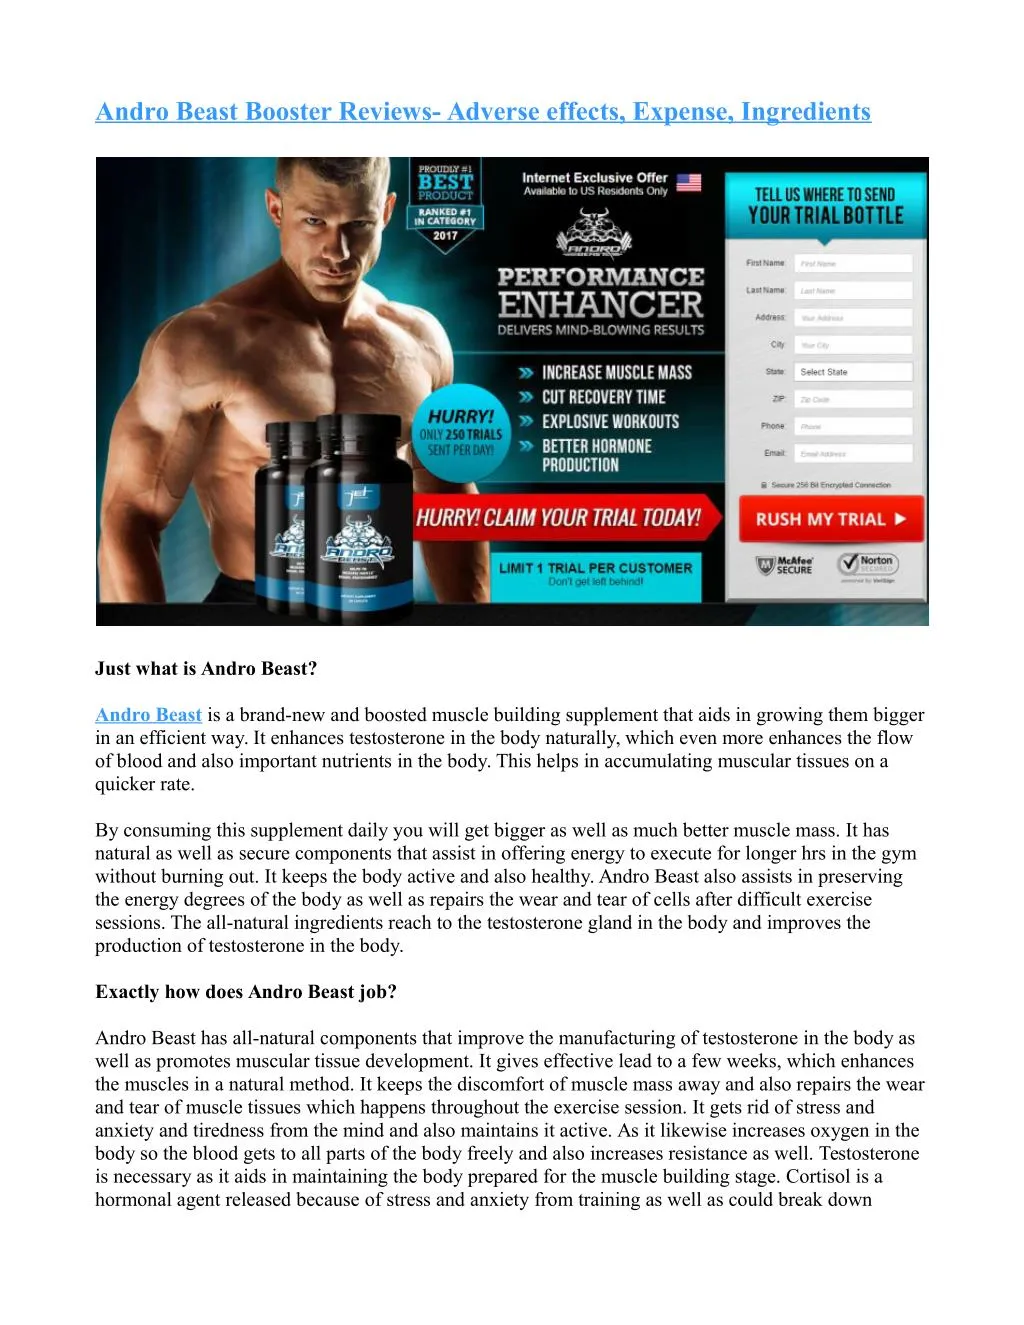 andro beast booster reviews adverse effects